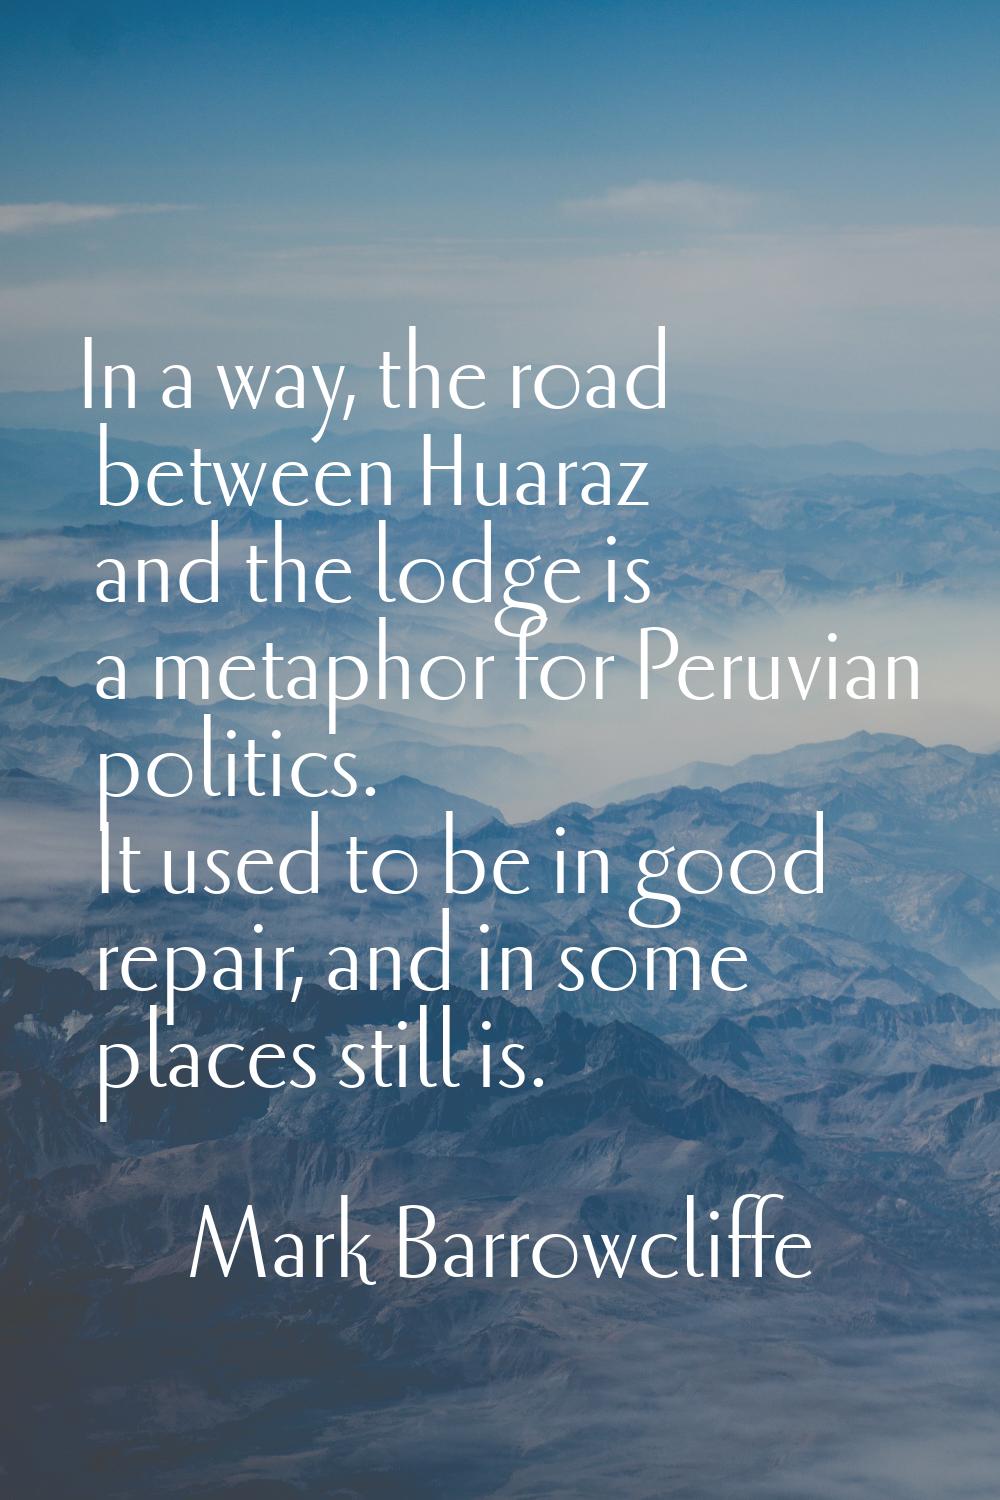 In a way, the road between Huaraz and the lodge is a metaphor for Peruvian politics. It used to be 